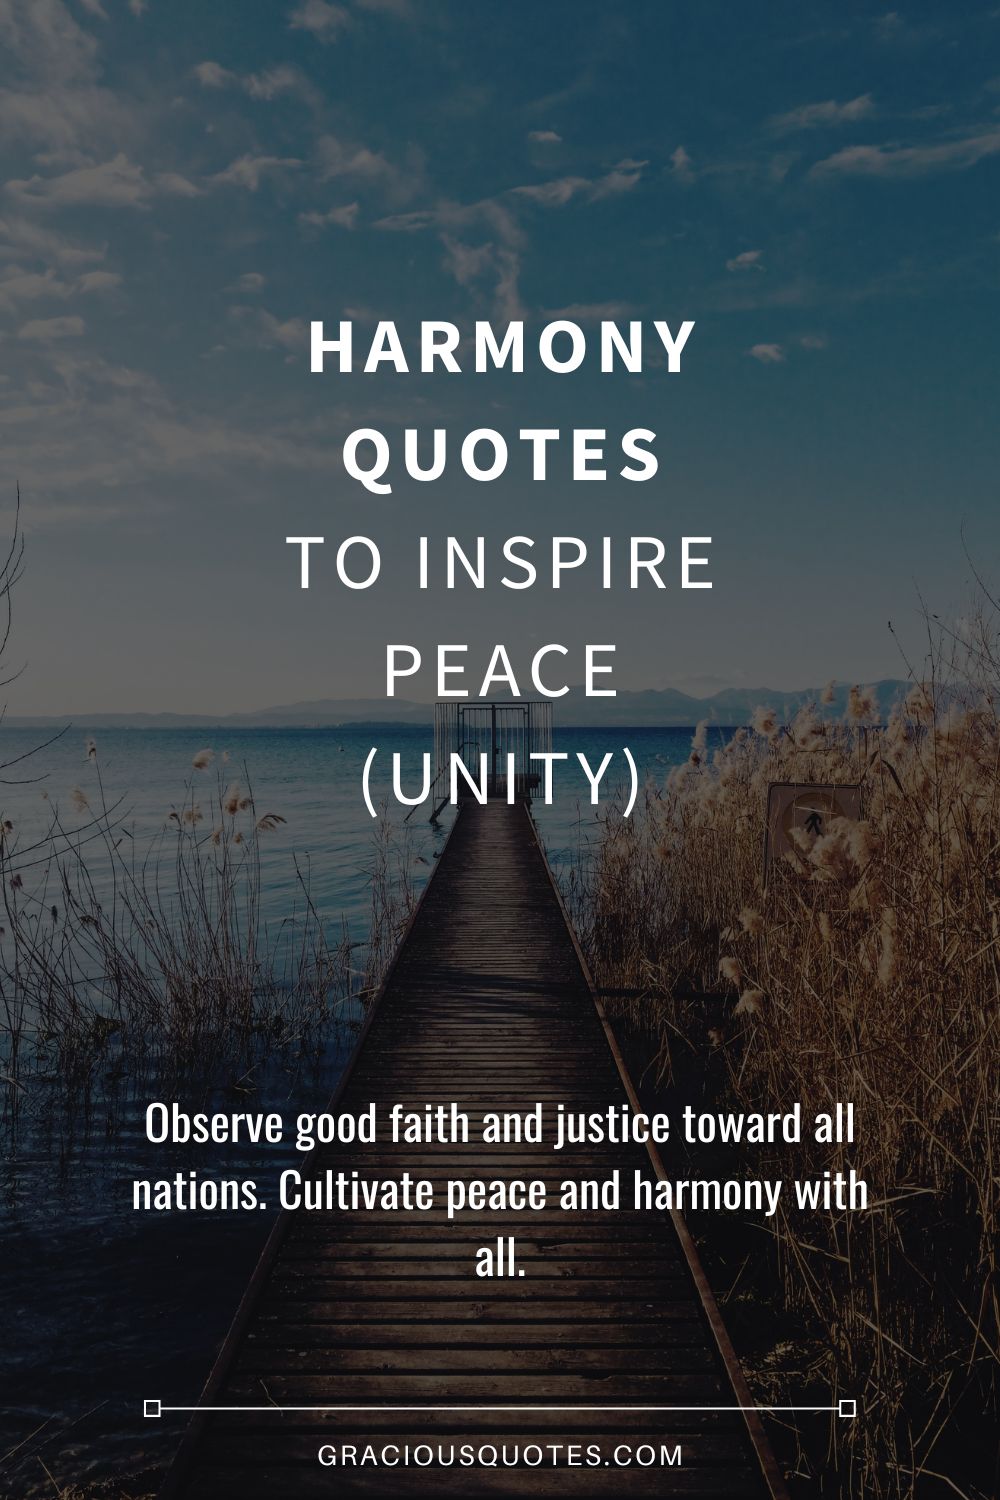 Harmony Quotes to Inspire Peace (UNITY) - Gracious Quotes